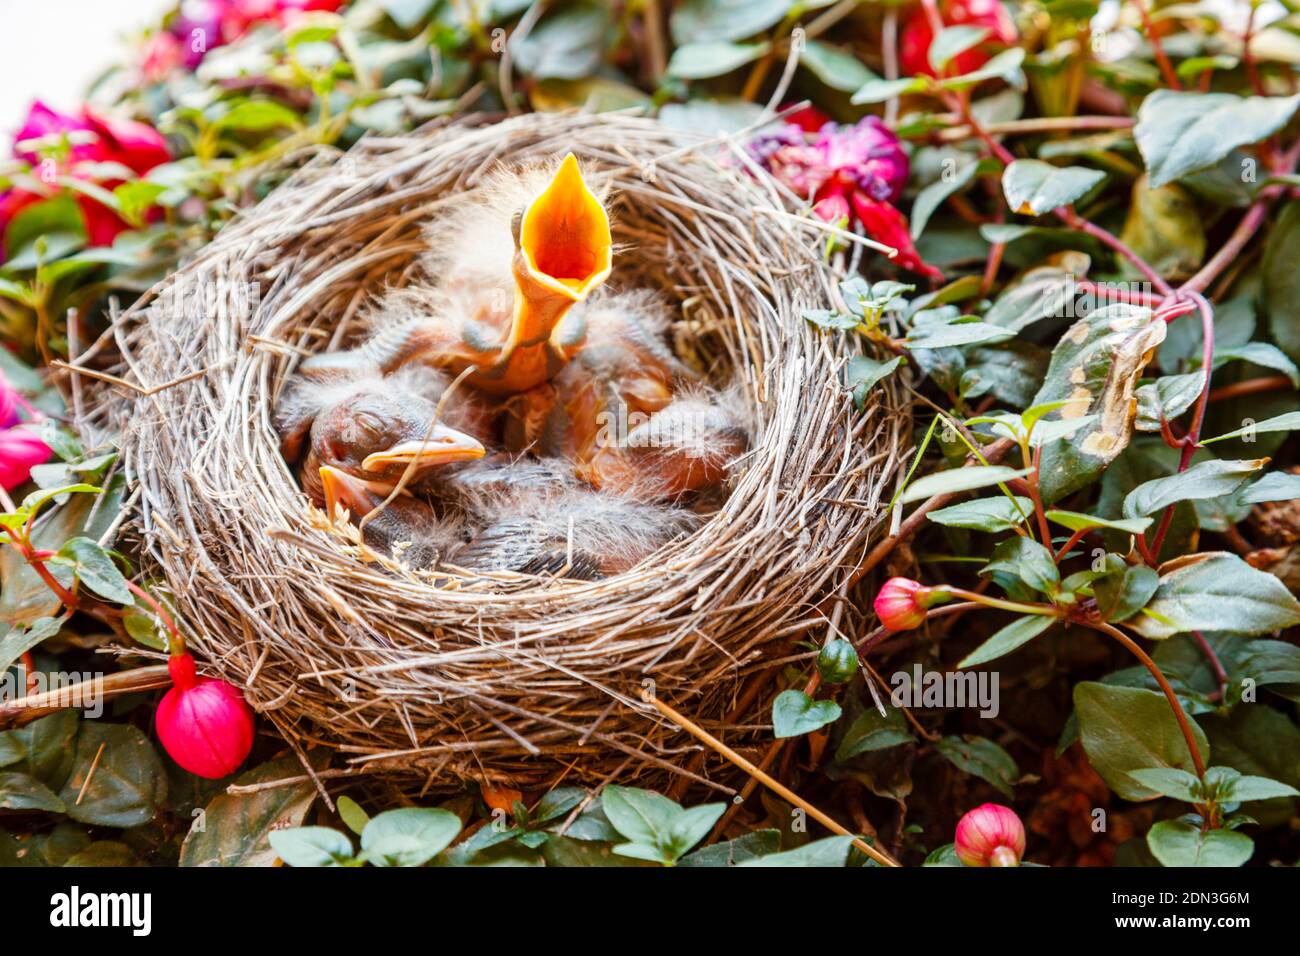 A Robin's nest in flowering fuchsia plant, with baby robins newly hatched. Stock Photo